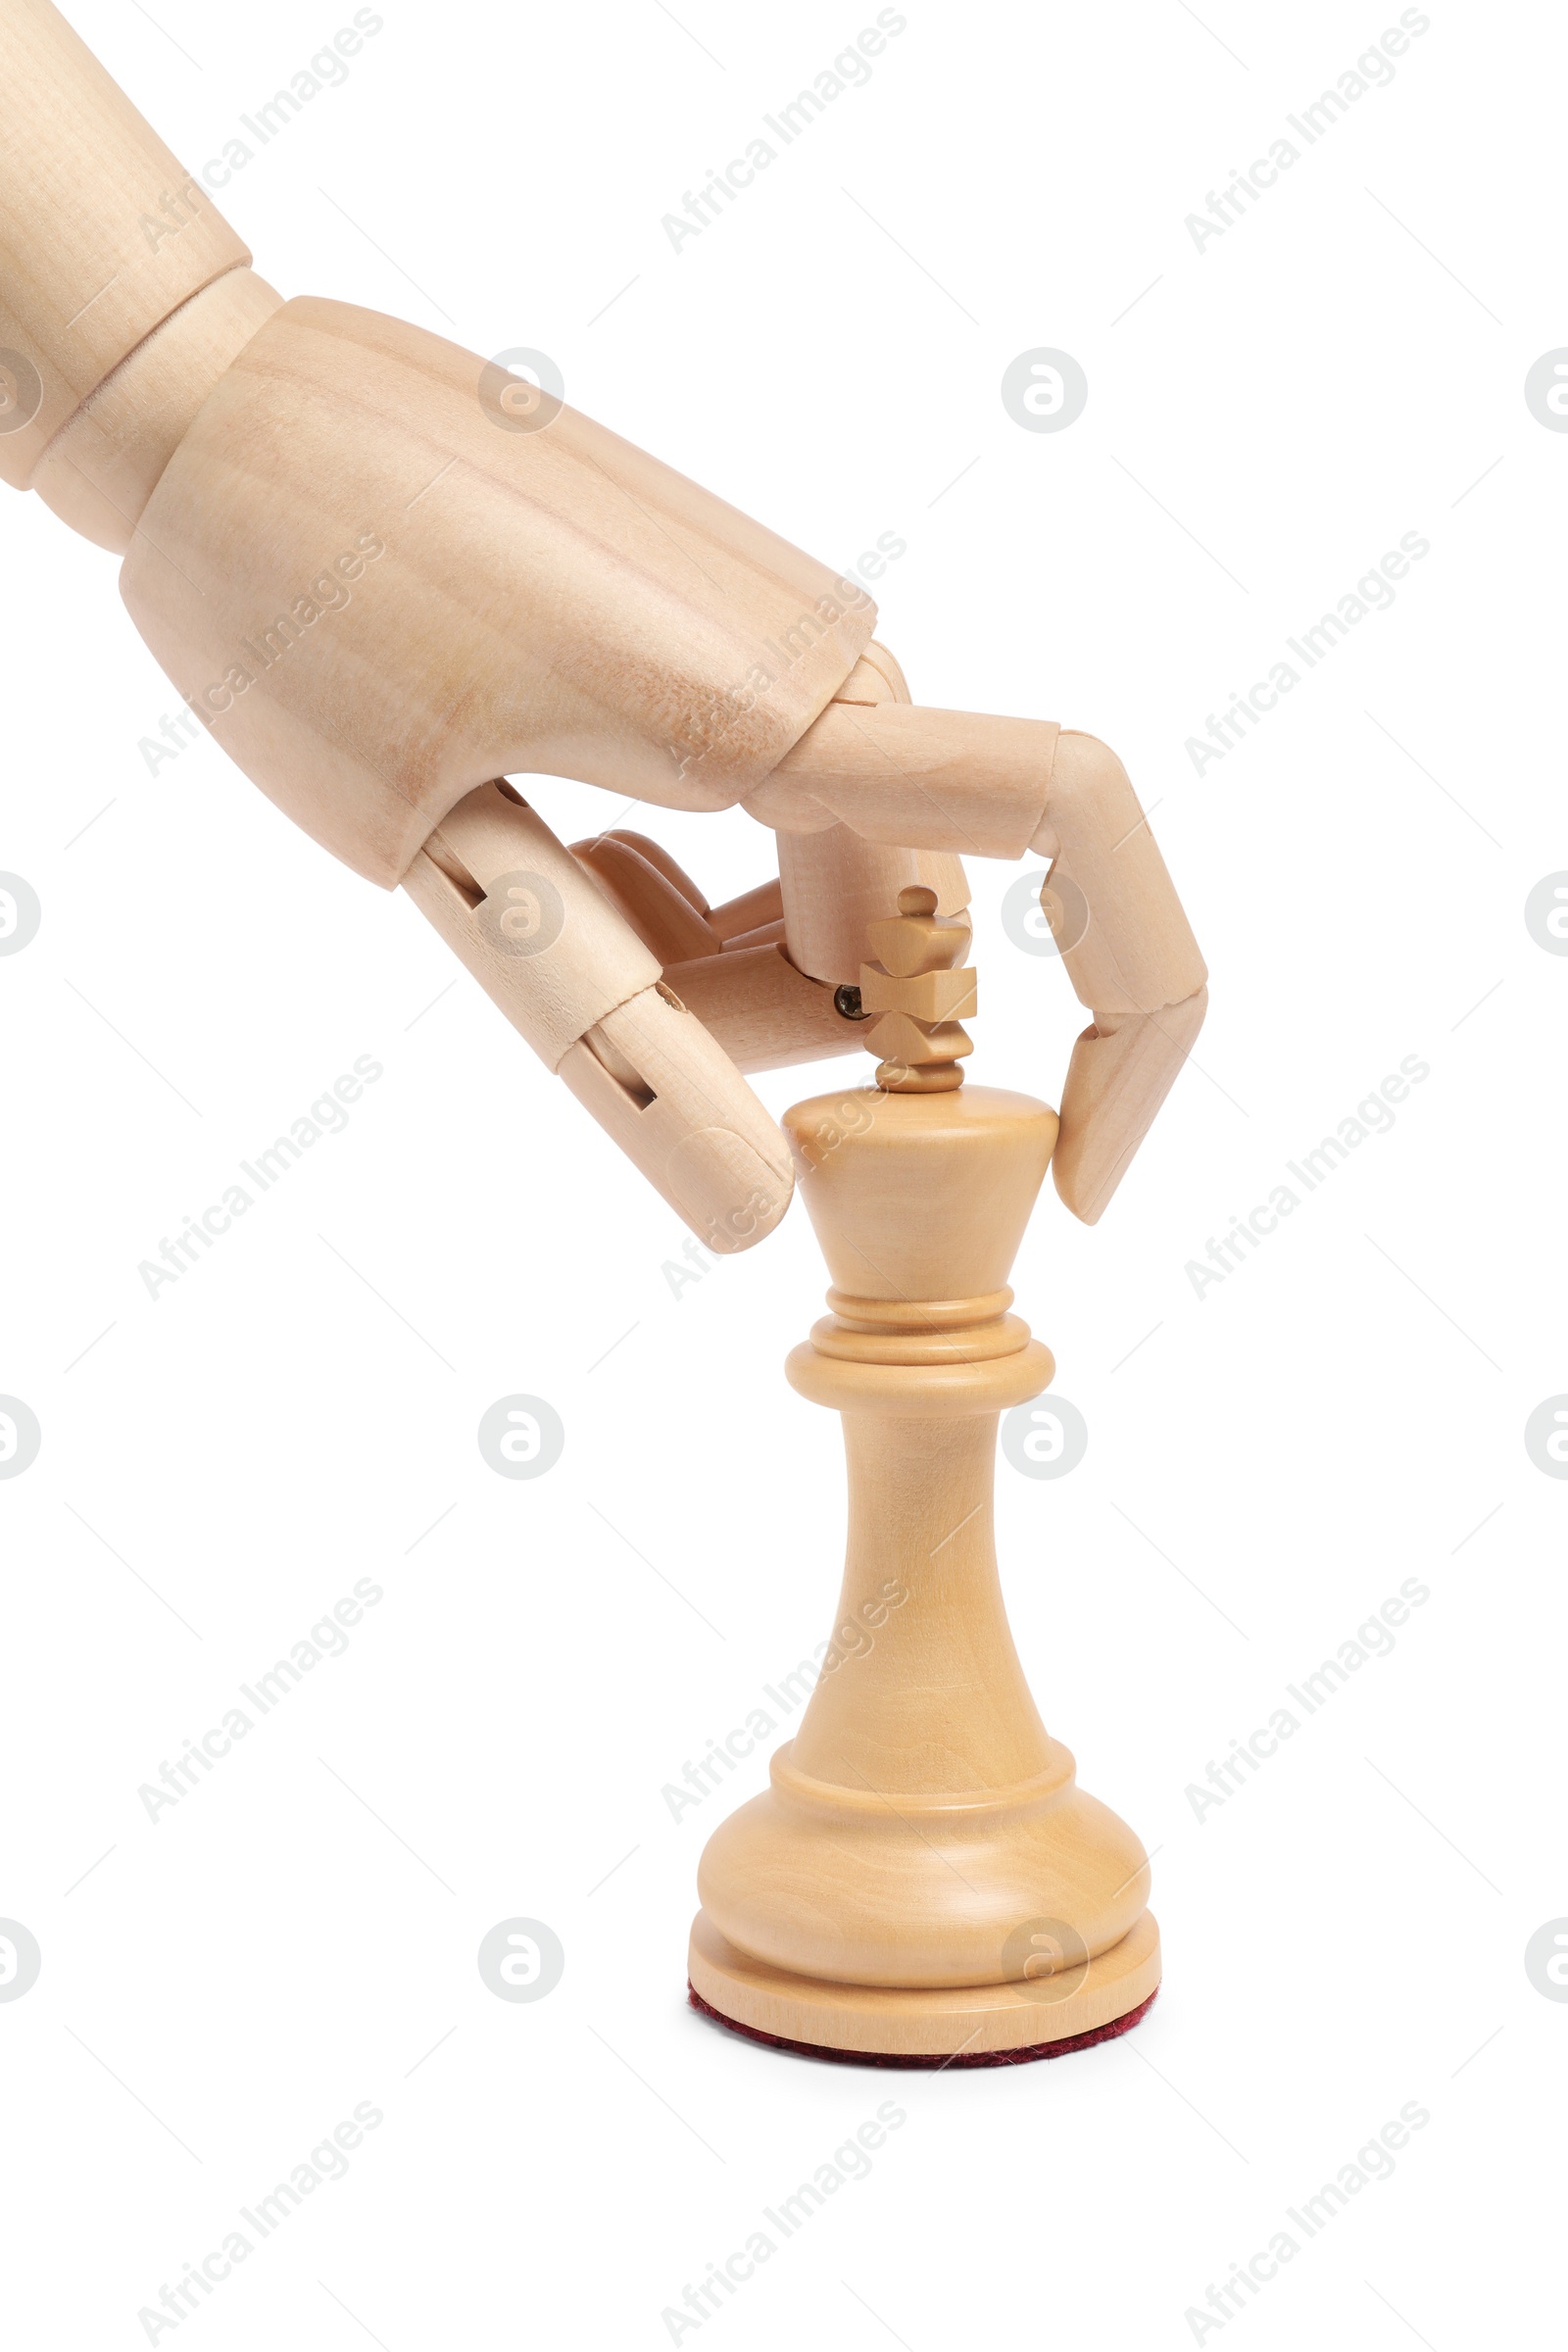 Photo of Robot with chess piece isolated on white. Wooden hand representing artificial intelligence